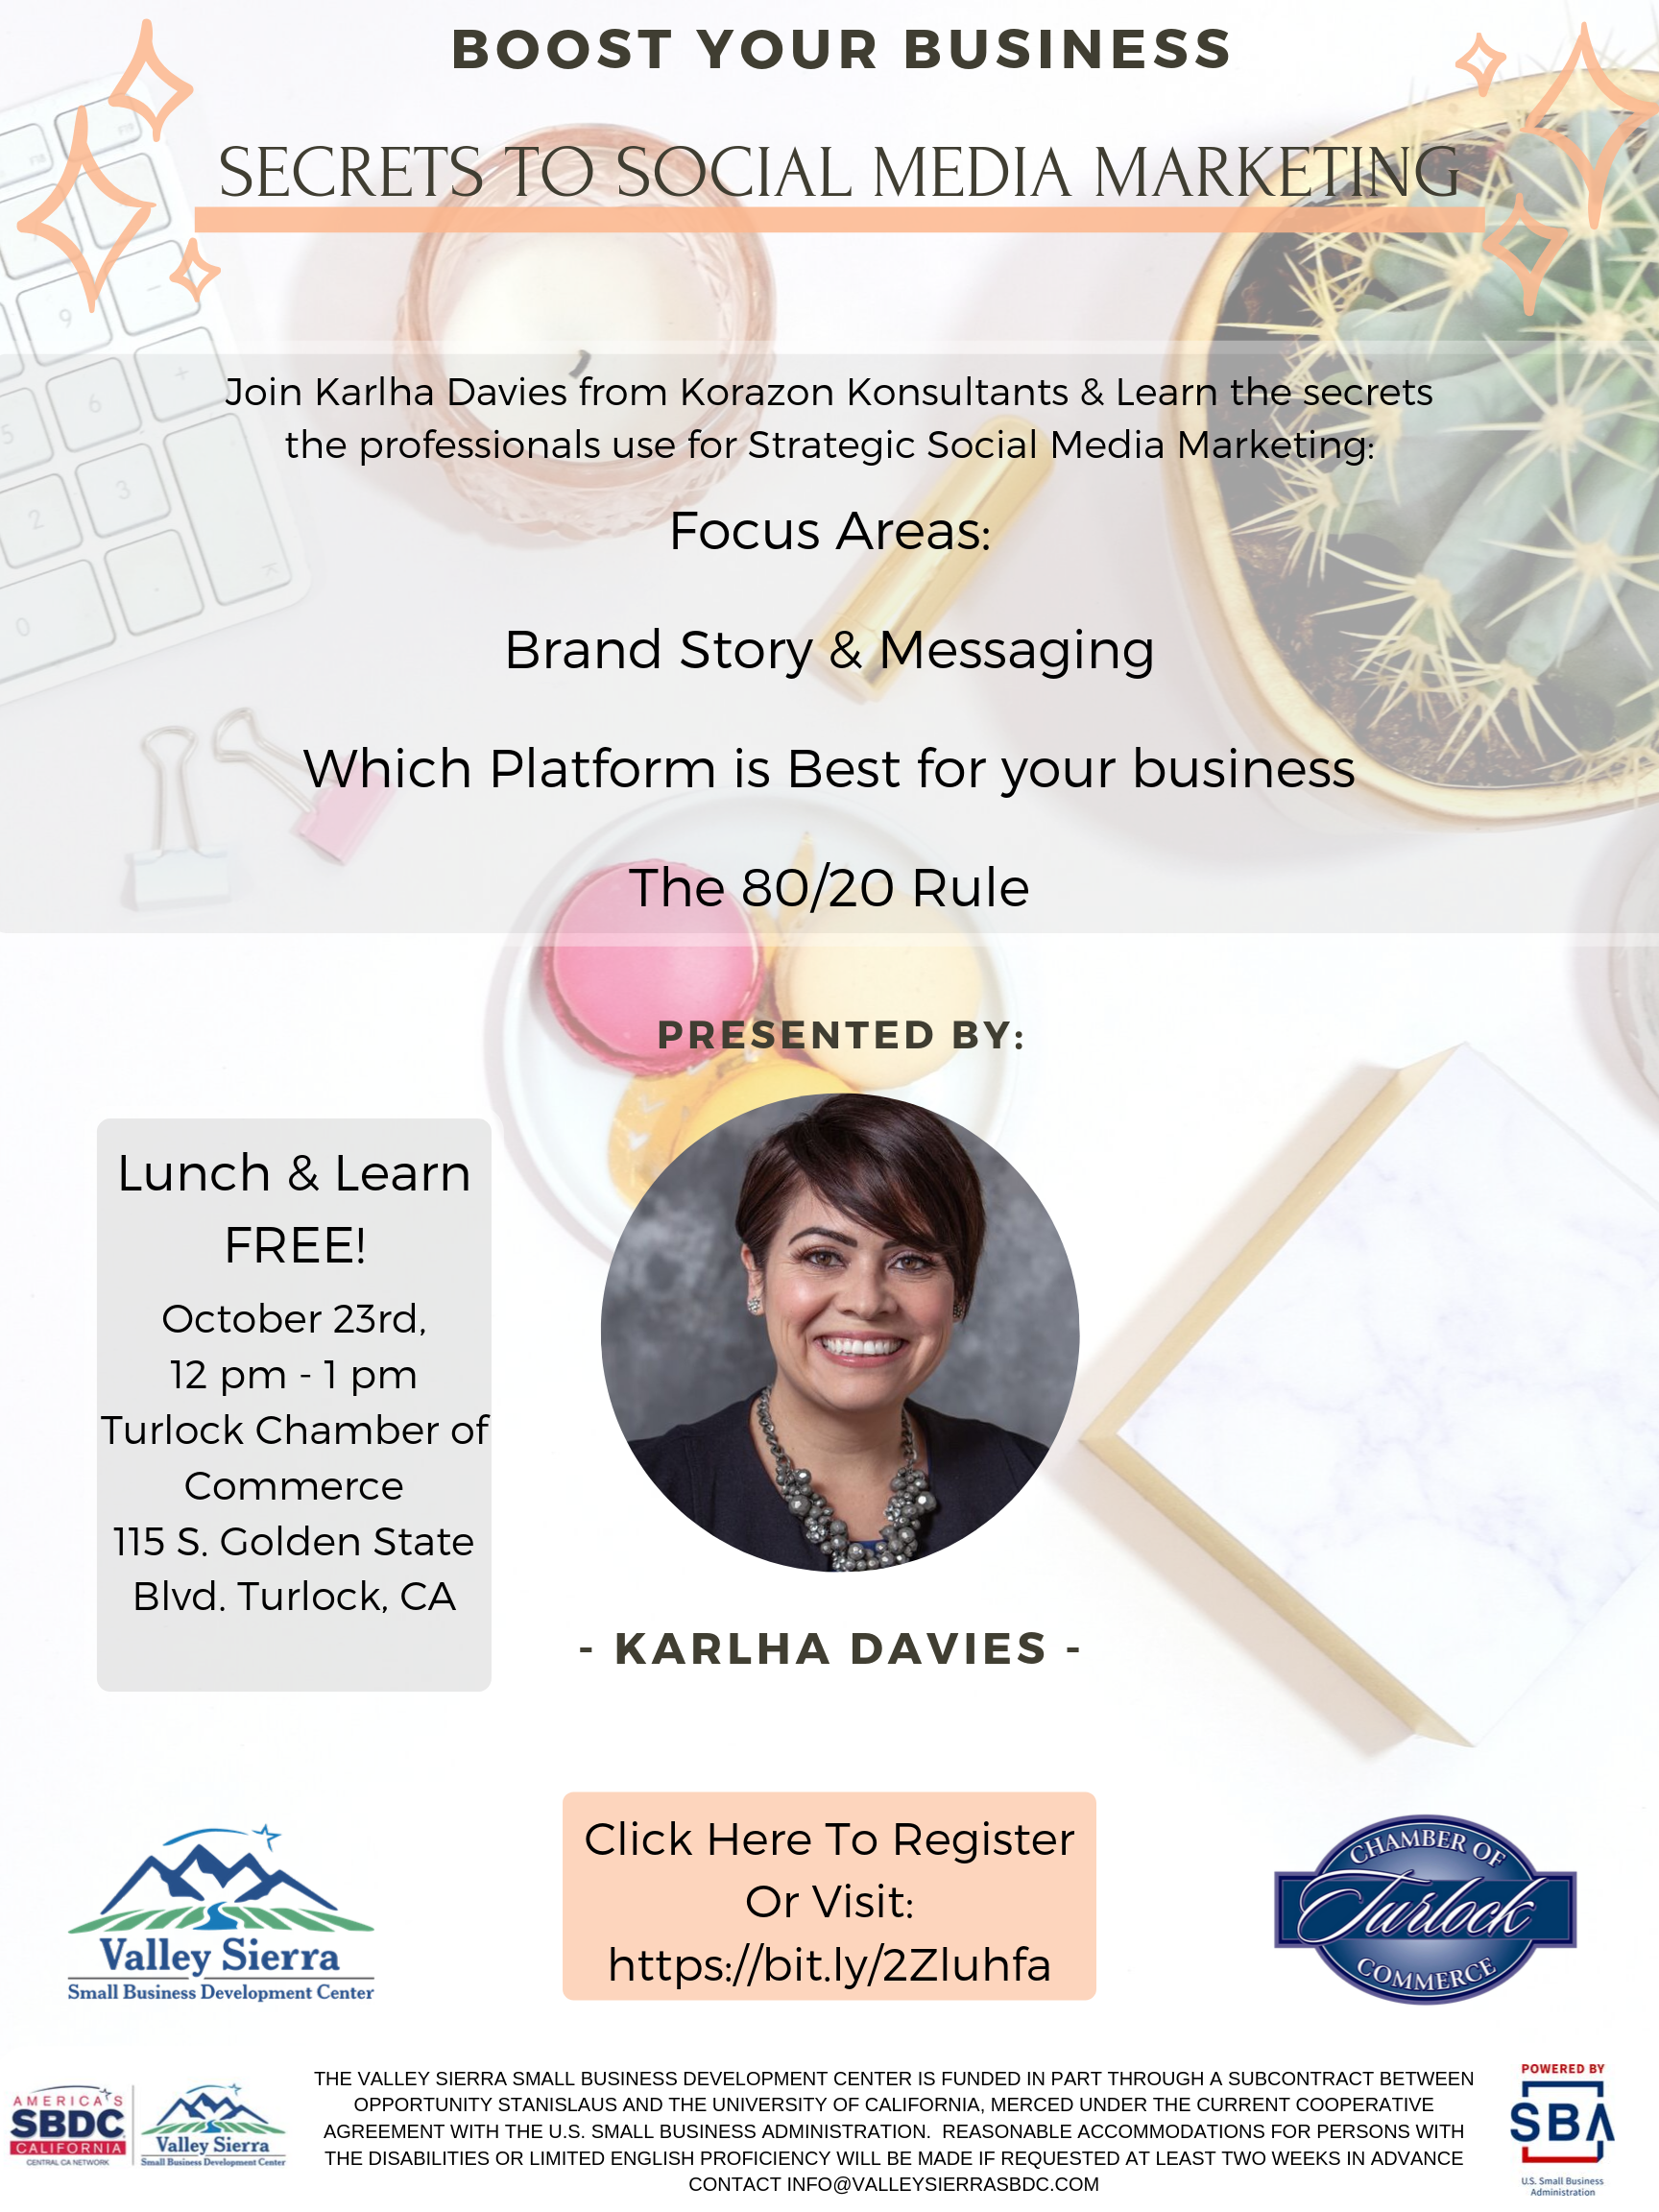 Event Flyer, Lunch & Learn FREE! October 23rd, 12 pm - 1 pm Turlock Chamber of Commerce 115 S. Golden State Blvd. Turlock, CA. Focus Areas: Brand Story & Messaging Which Platform is Best for your business The 80/20 Rule